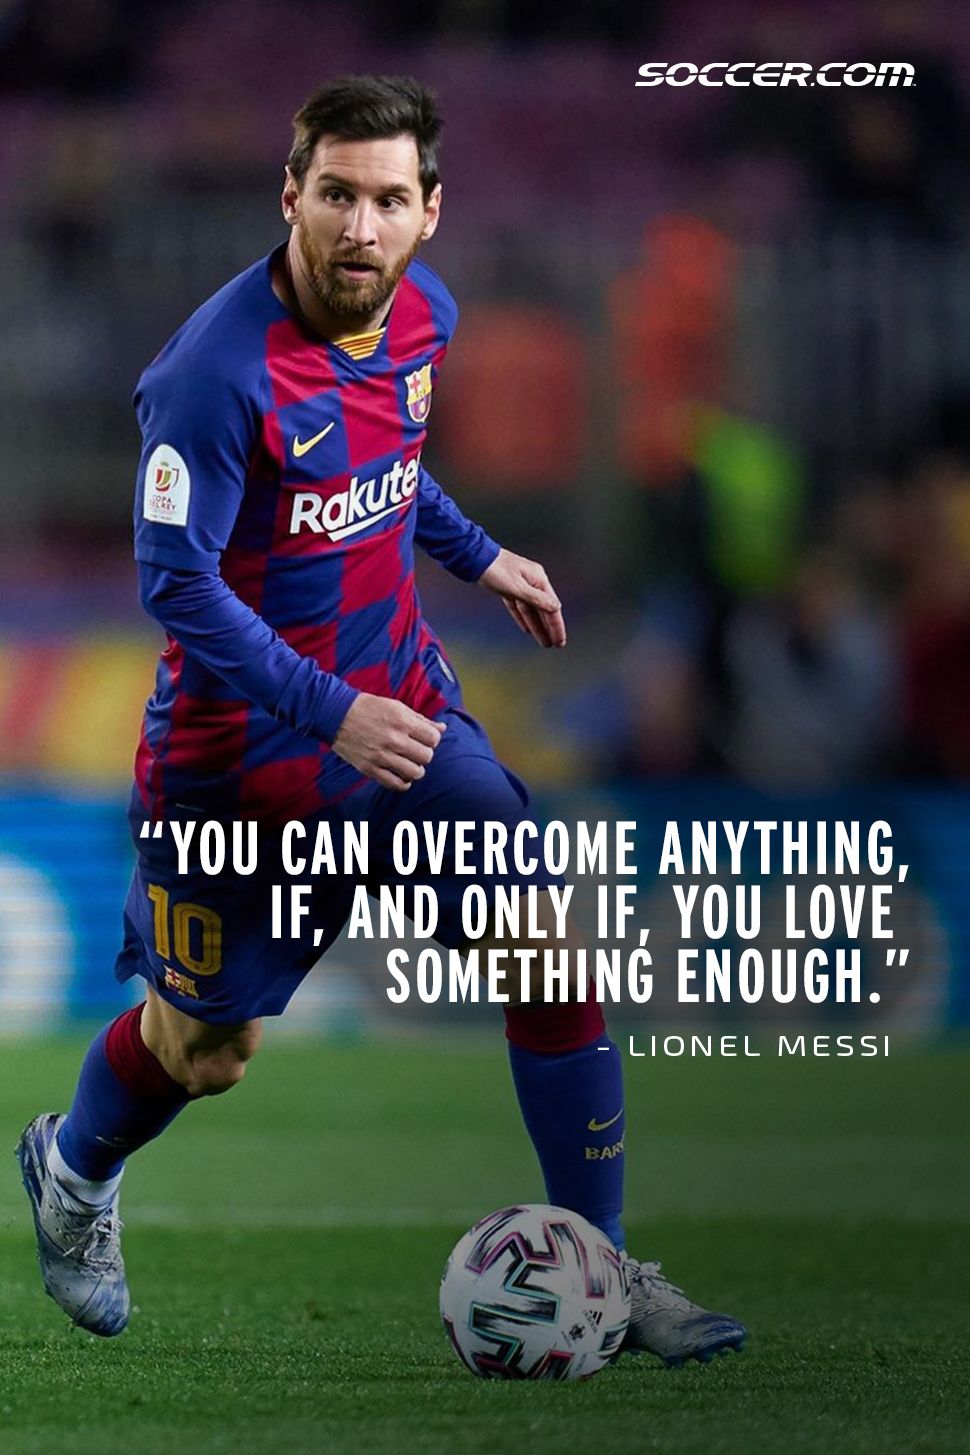 40 Inspirational Soccer Quotes for Players and Coaches | SOCCER.COM